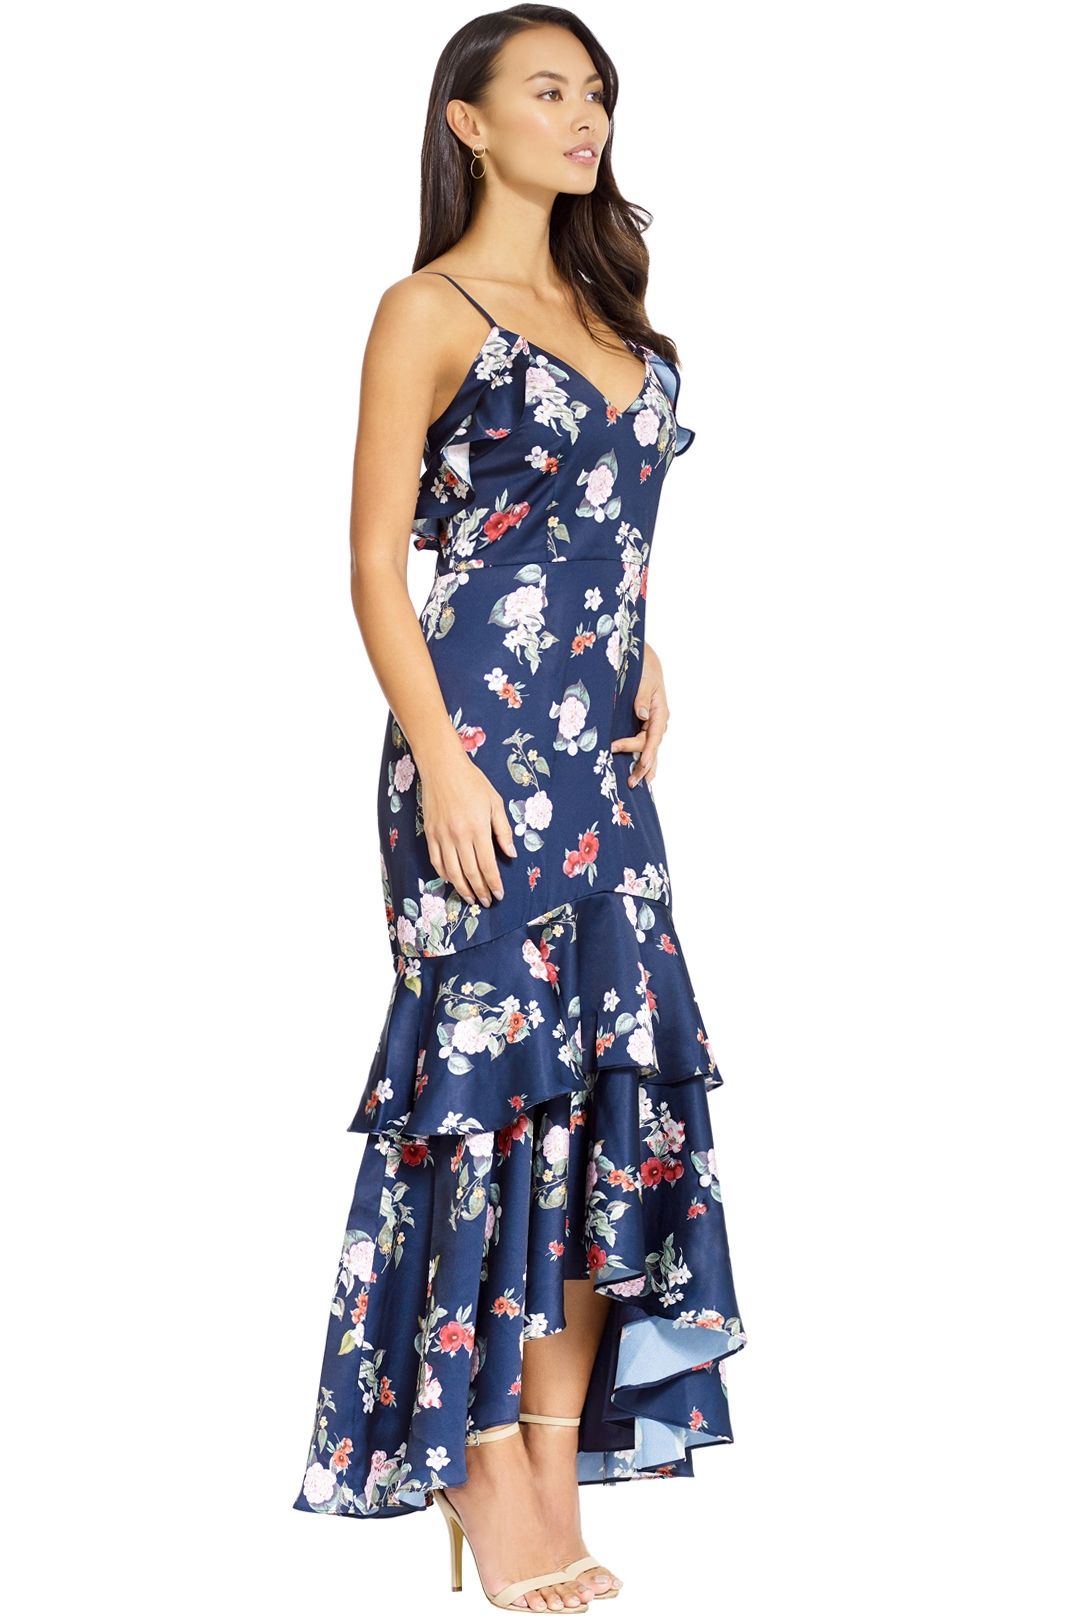 Keepsake the Label - For Me Gown - Navy Floral - Side